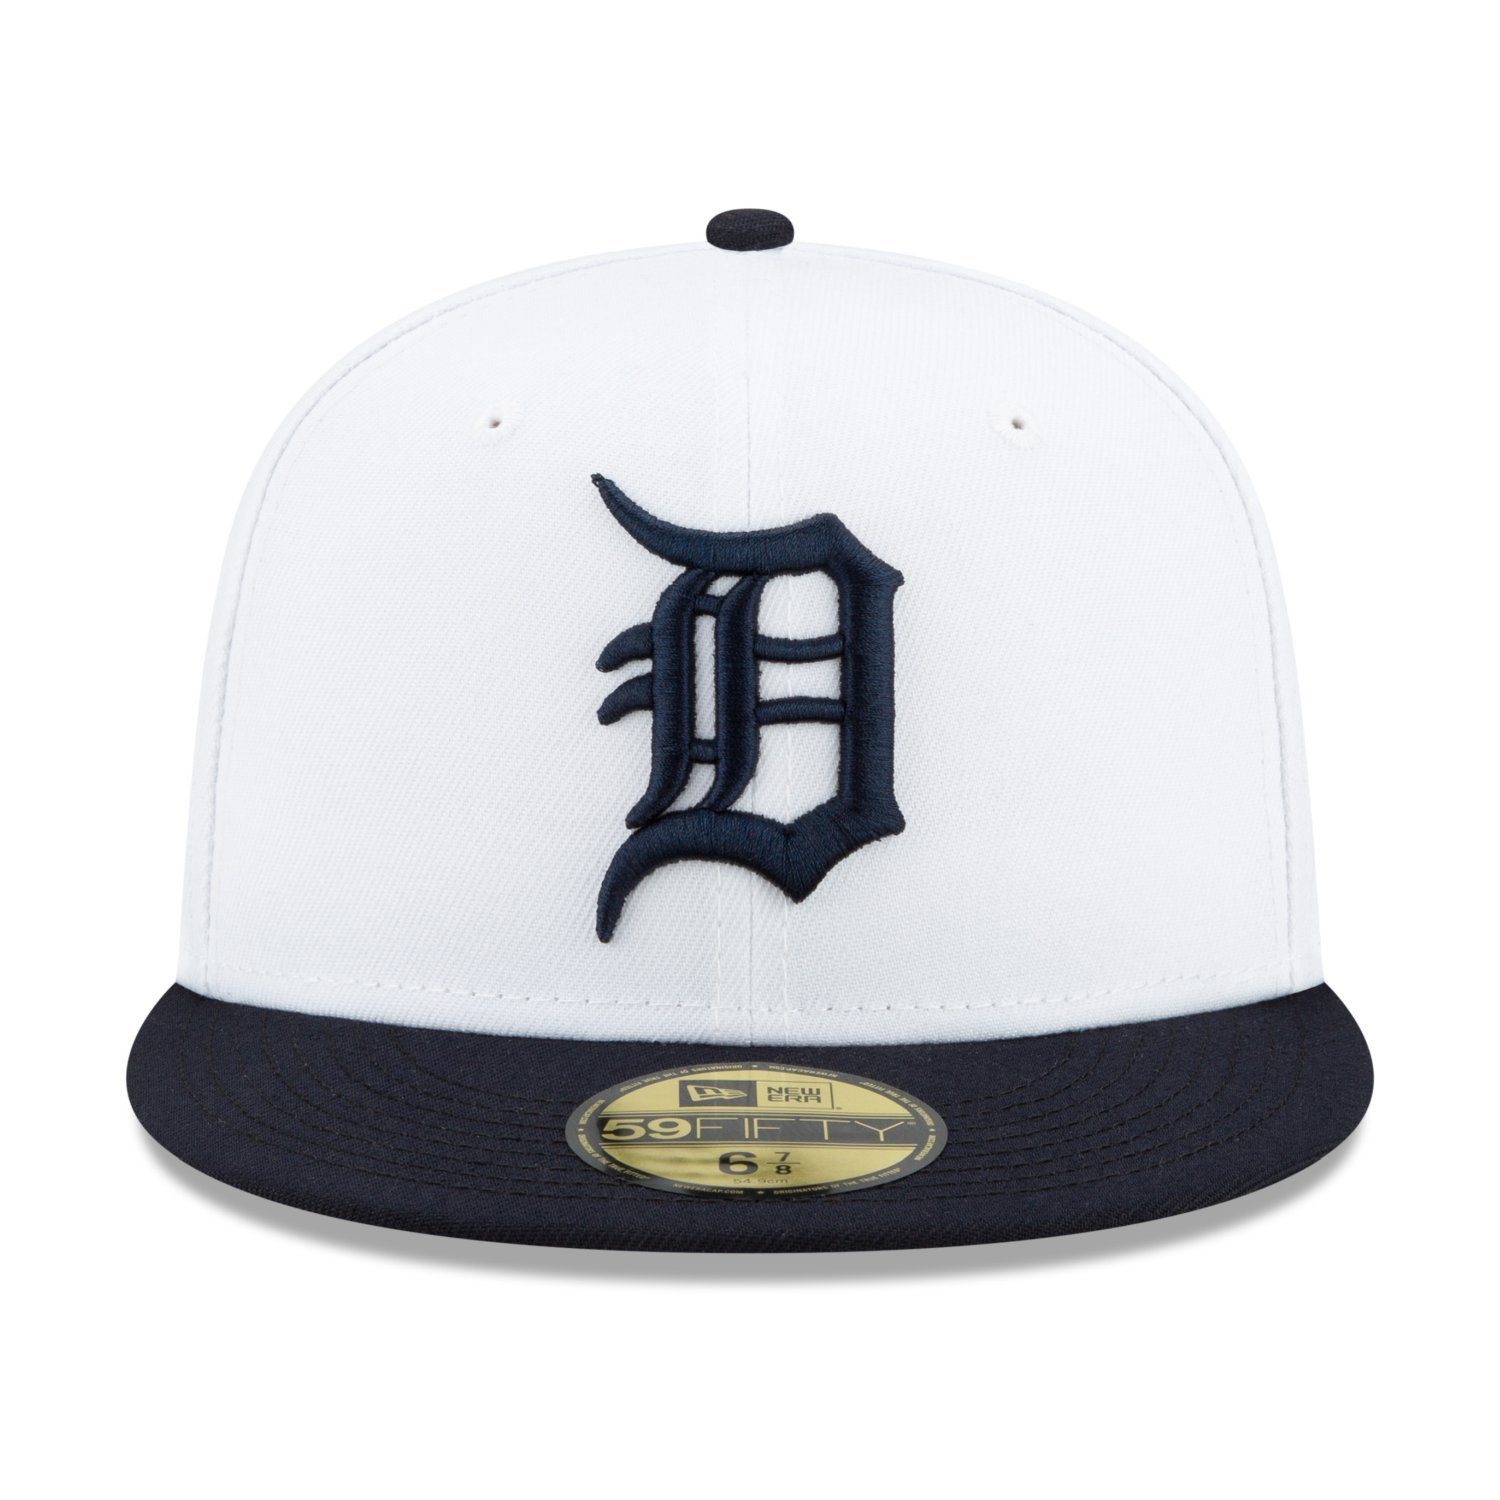 New Era Fitted 59Fifty Tigers SERIES 1984 Cap Detroit WORLD